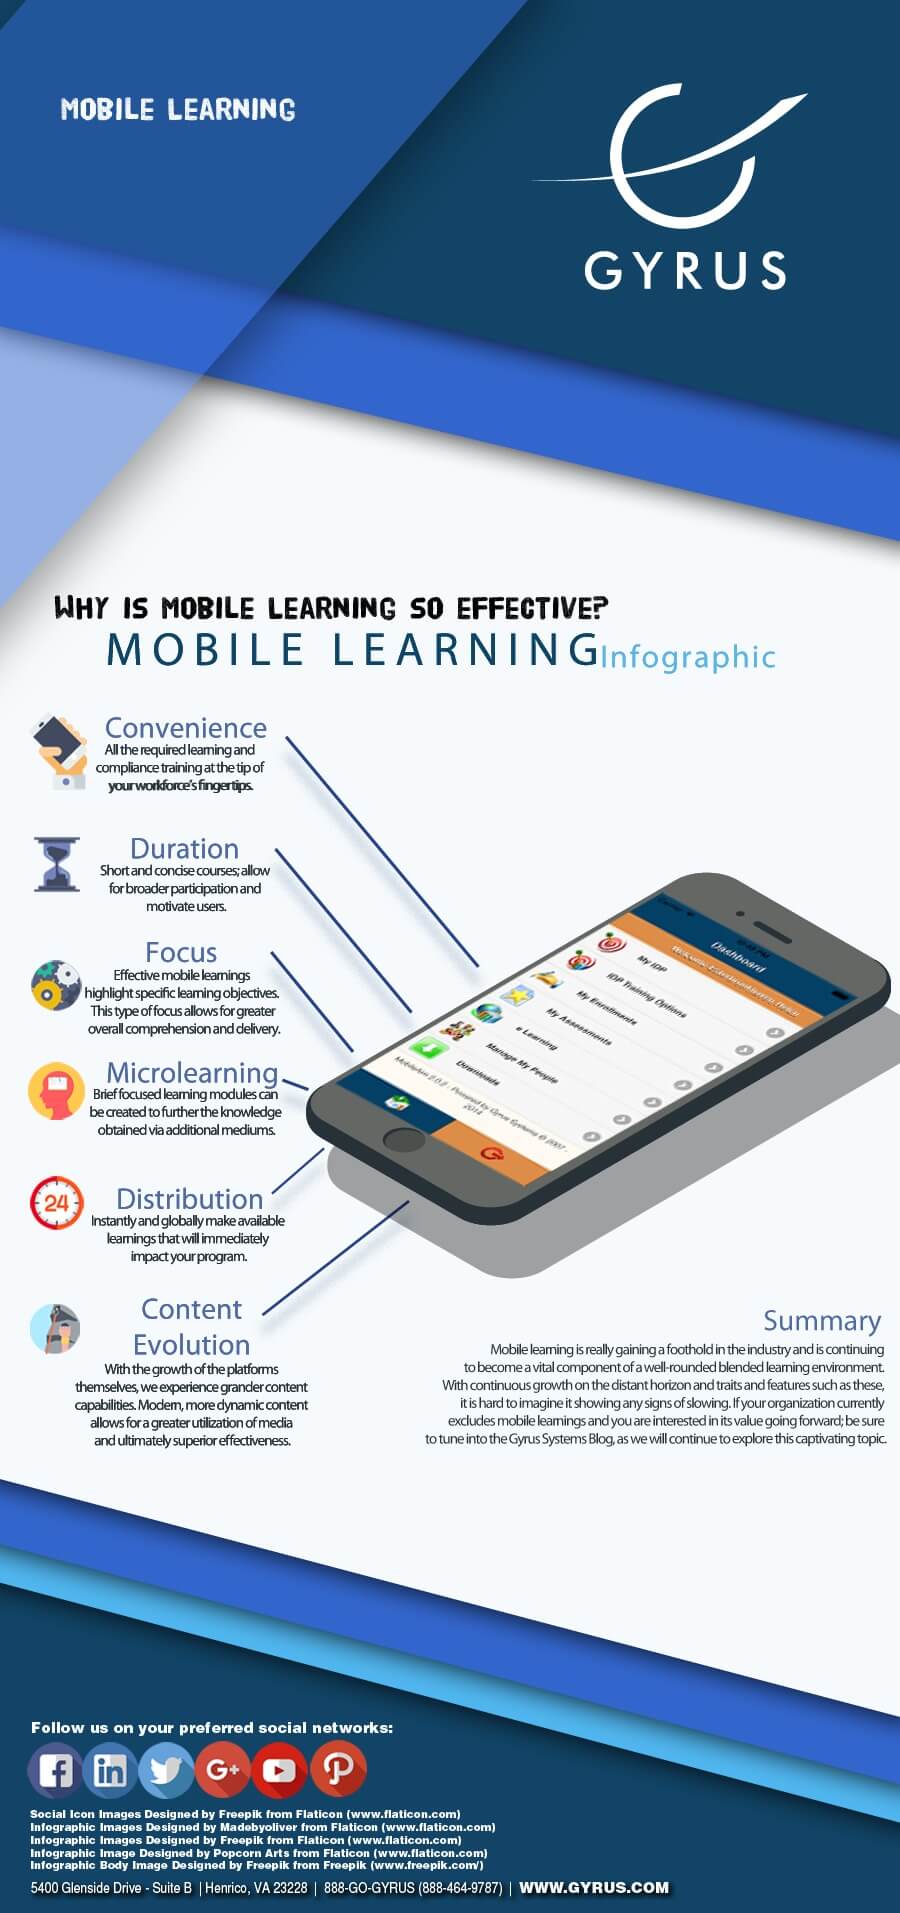 Mobile Learning Infographic - Benefits and Features